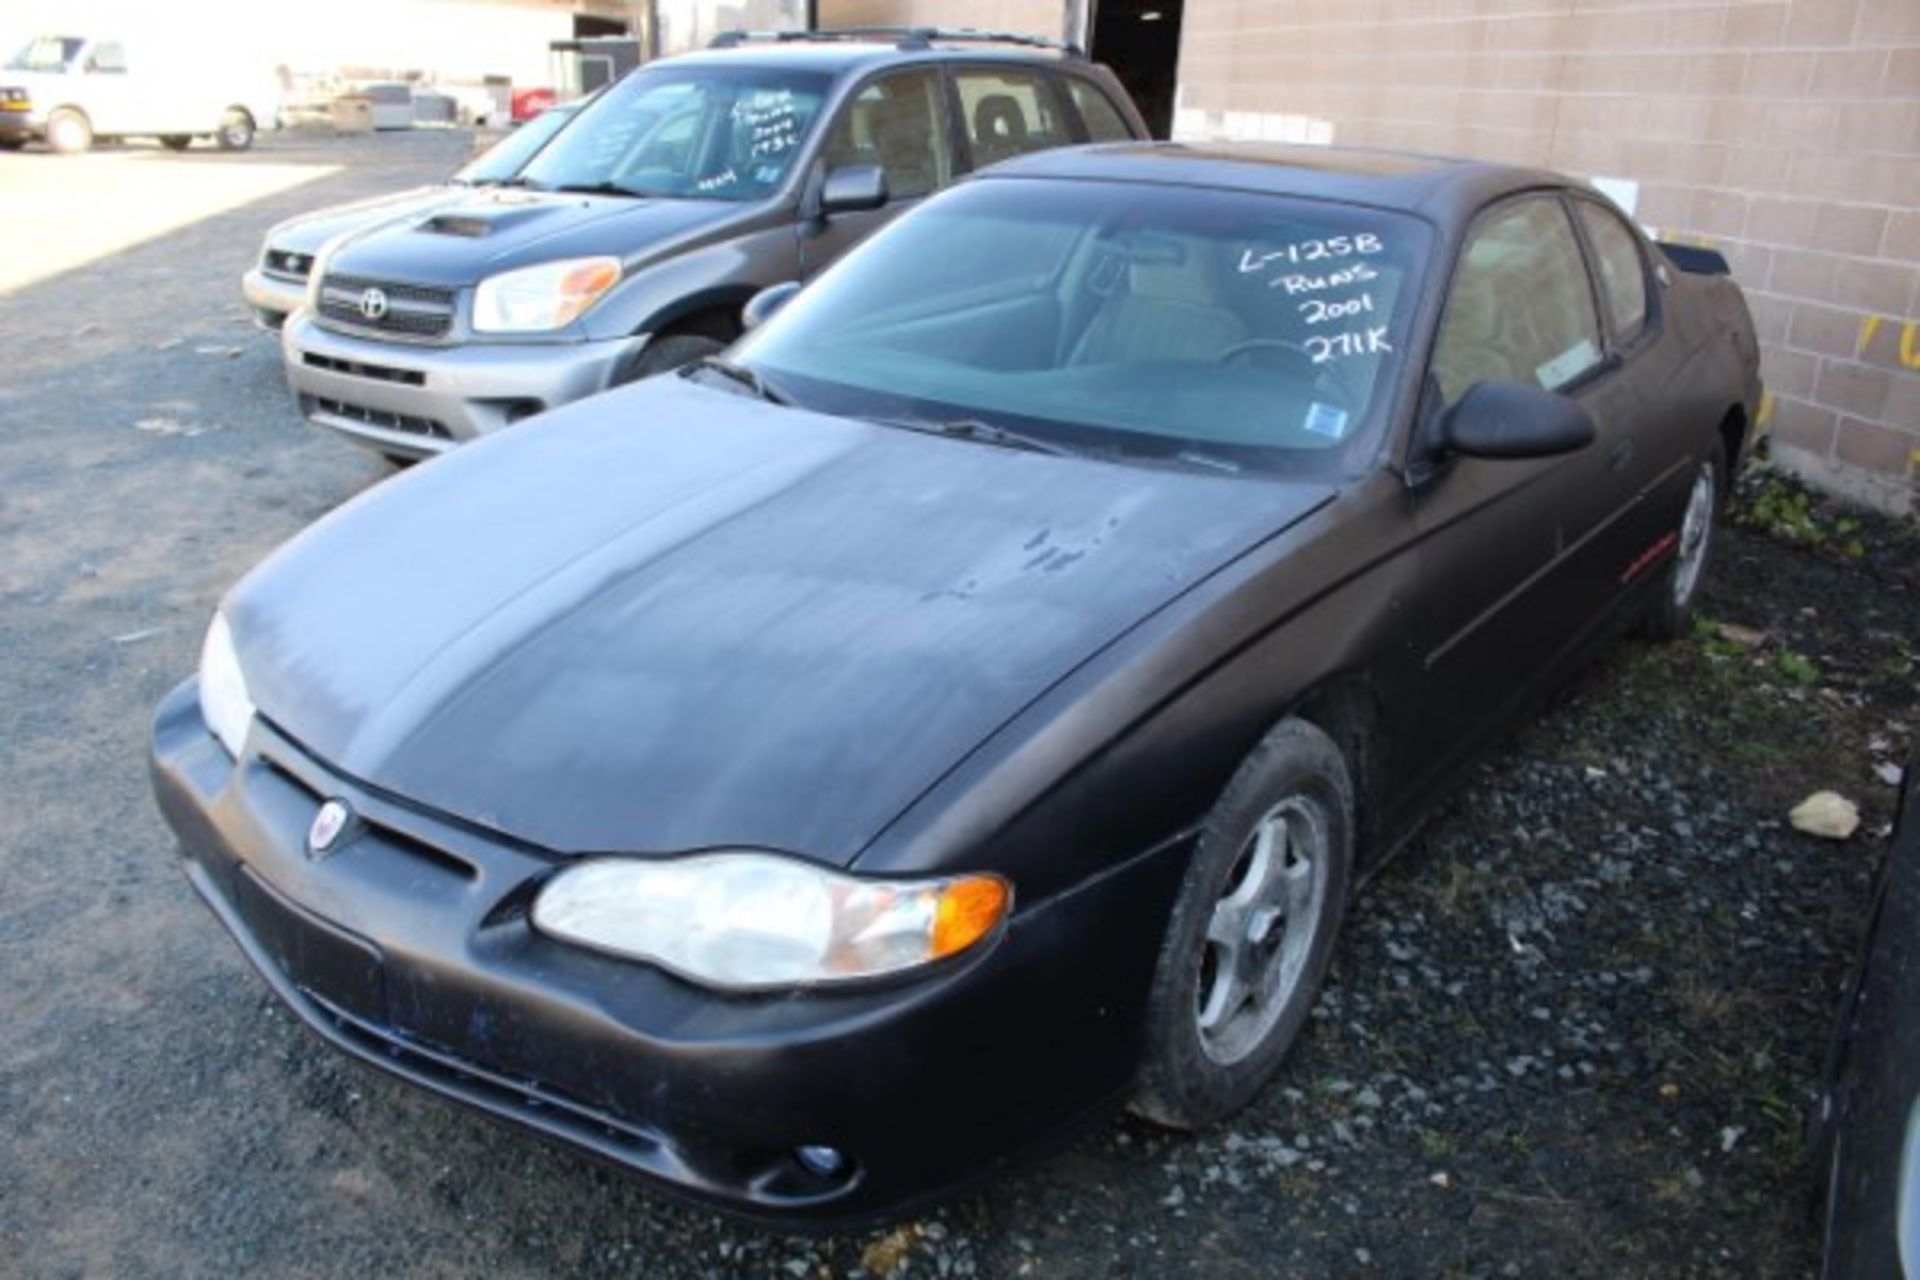 2001 Monte Carlo SS - Image 2 of 6